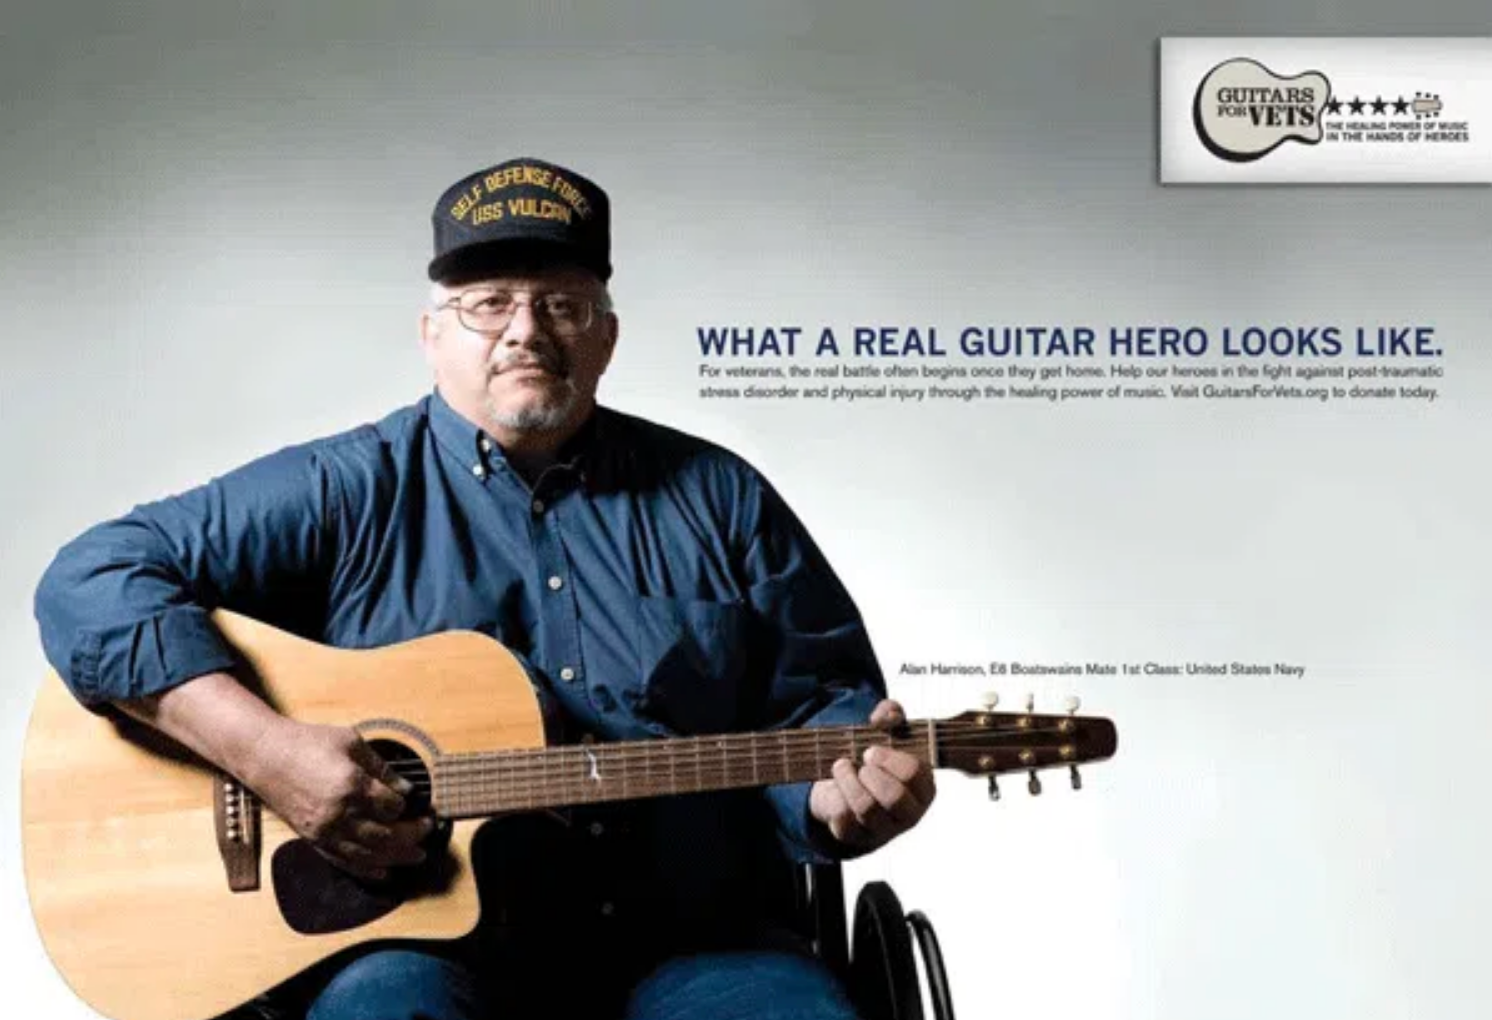 Brothers and Sisters In Arms: Guitars for Vets